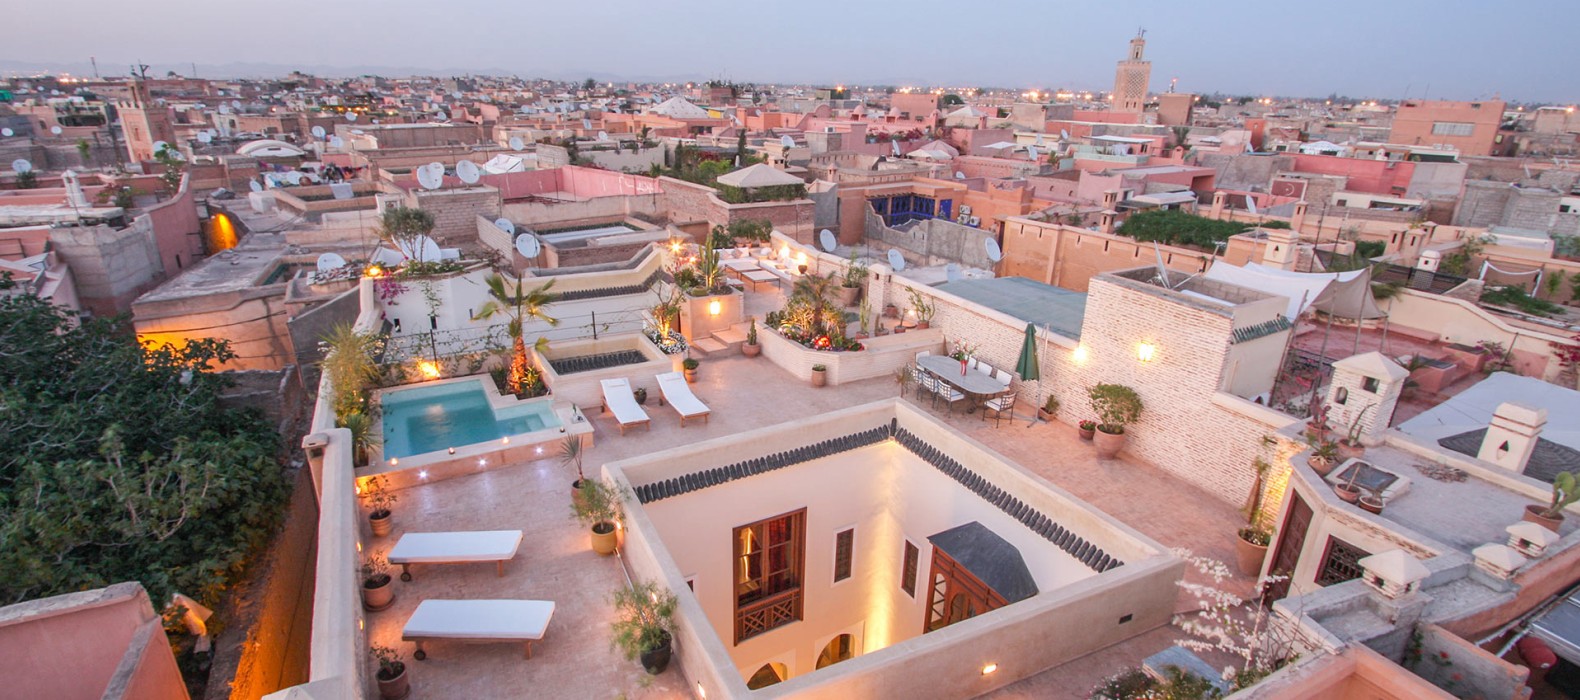 Rooftop view of Riad Yazid in Marrakech